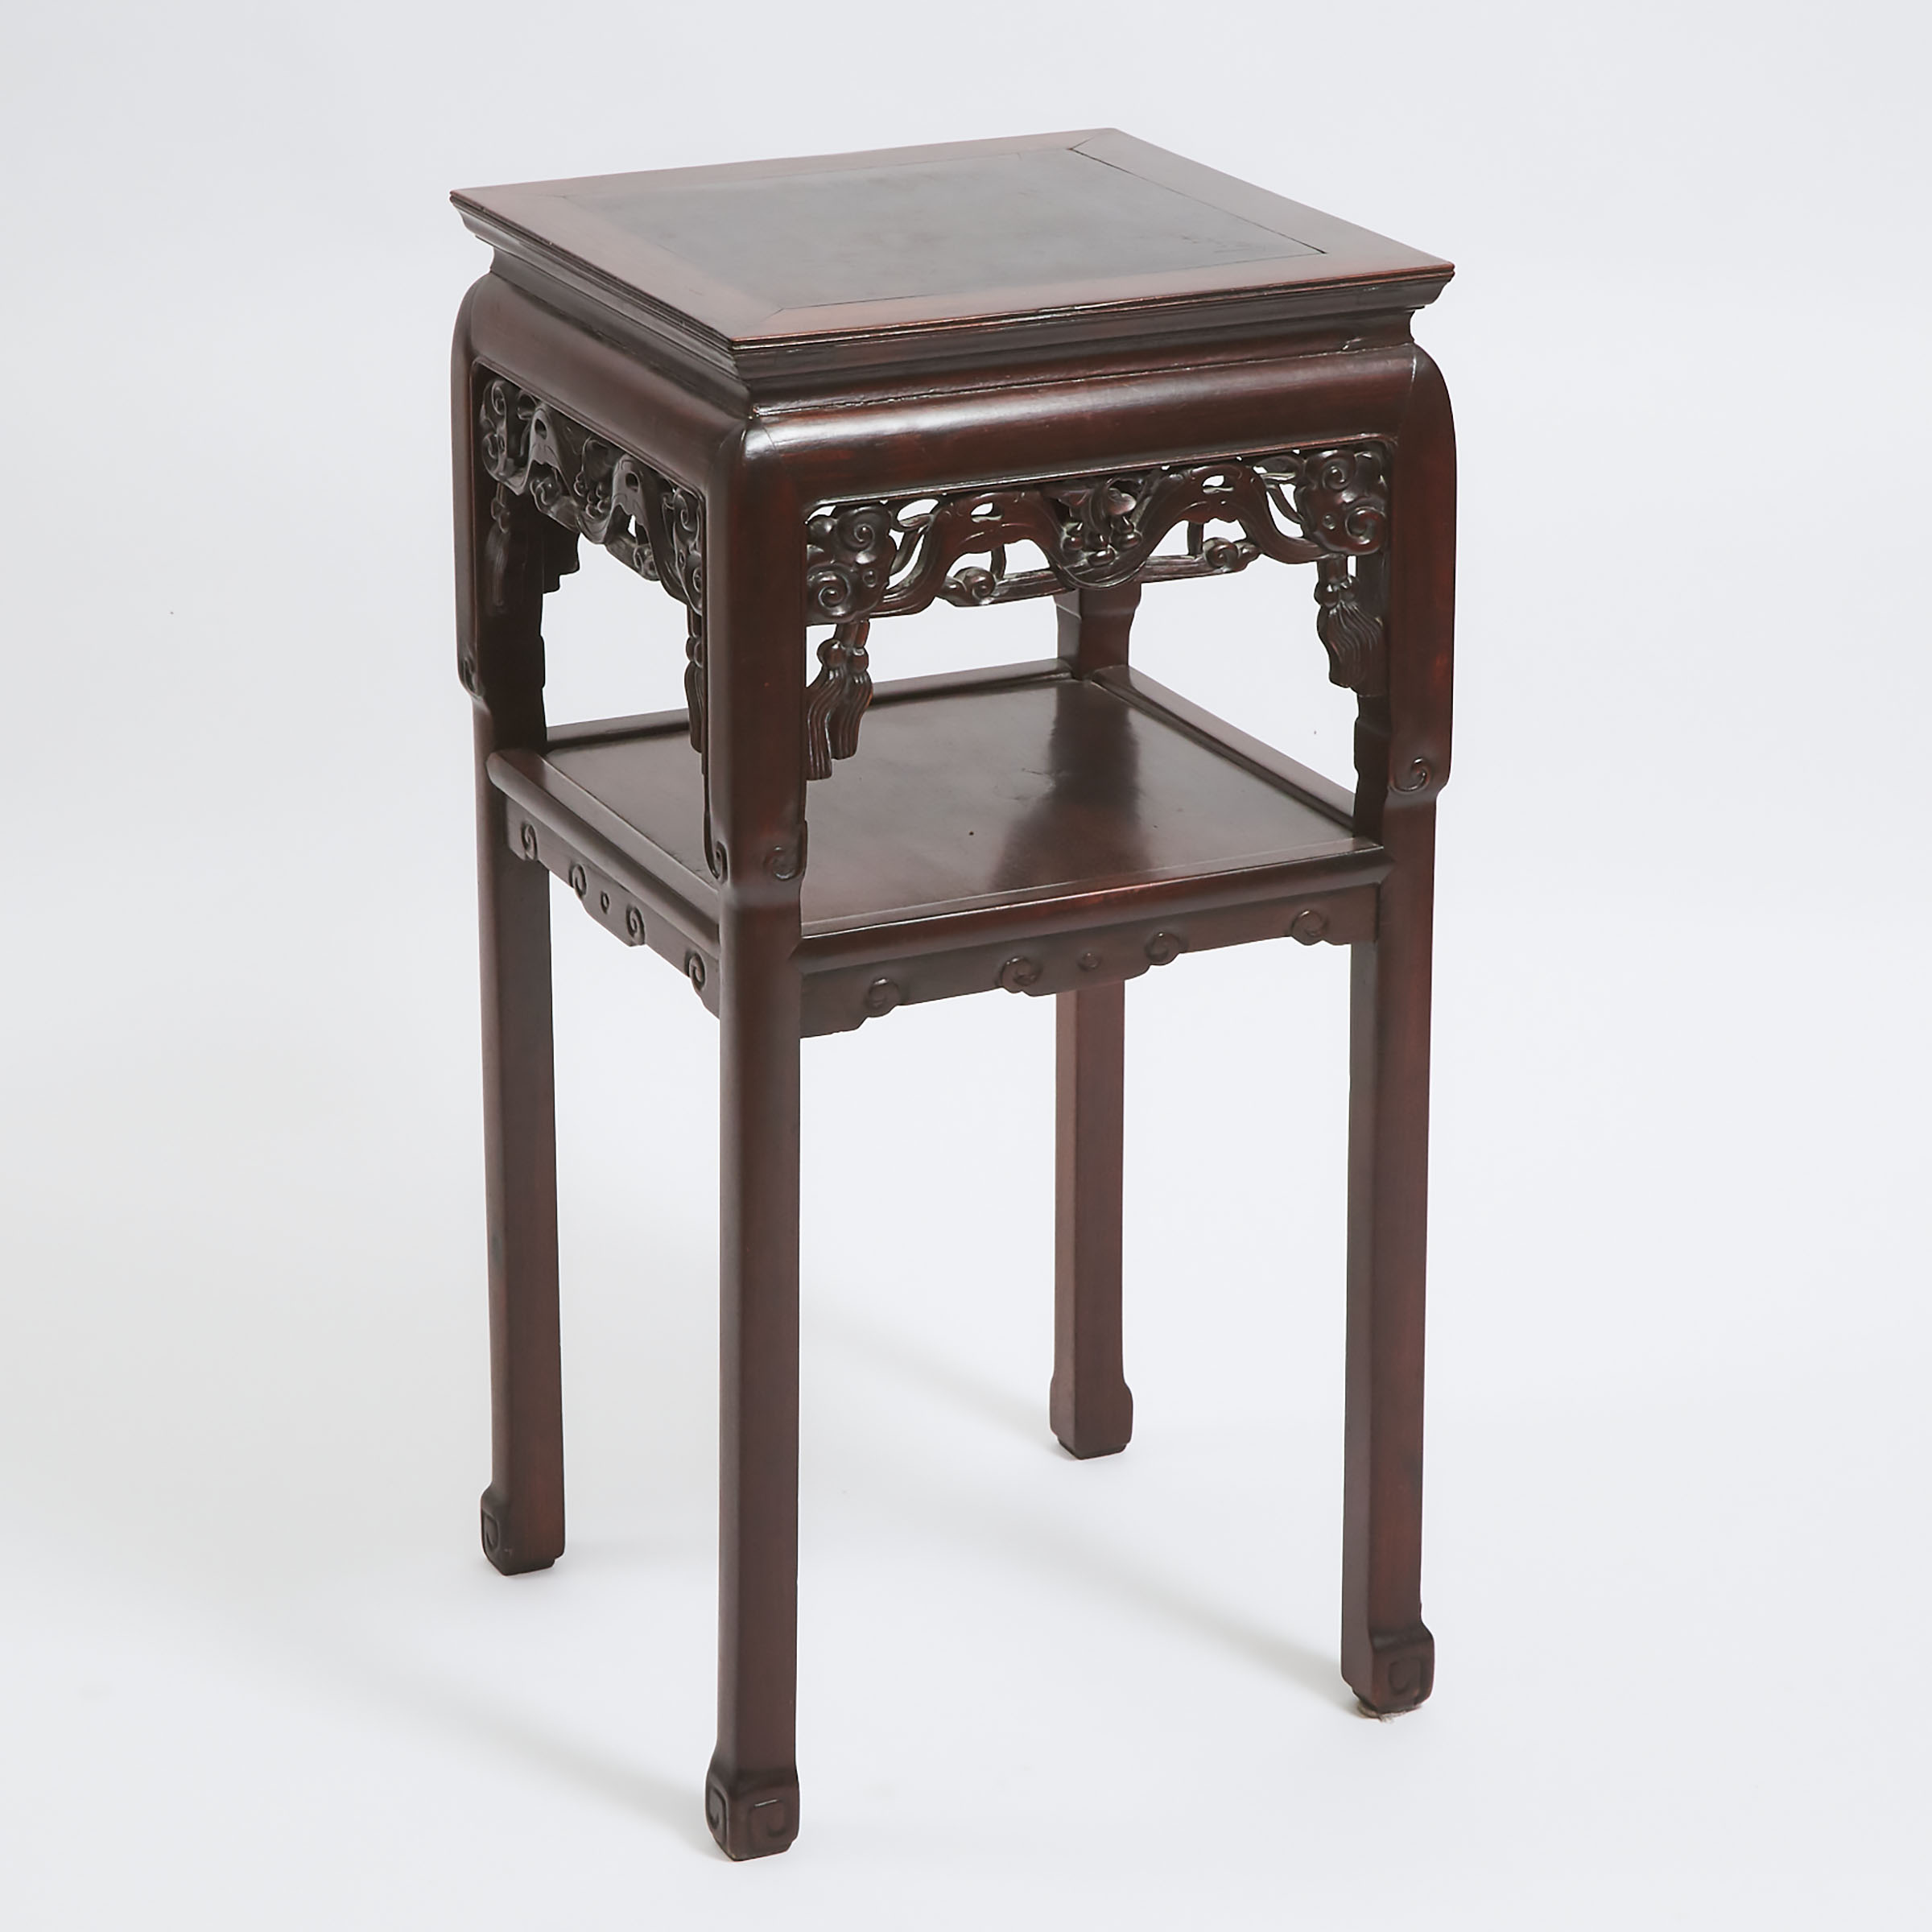 A Chinese Rosewood Square Table, Early to Mid 20th Century 